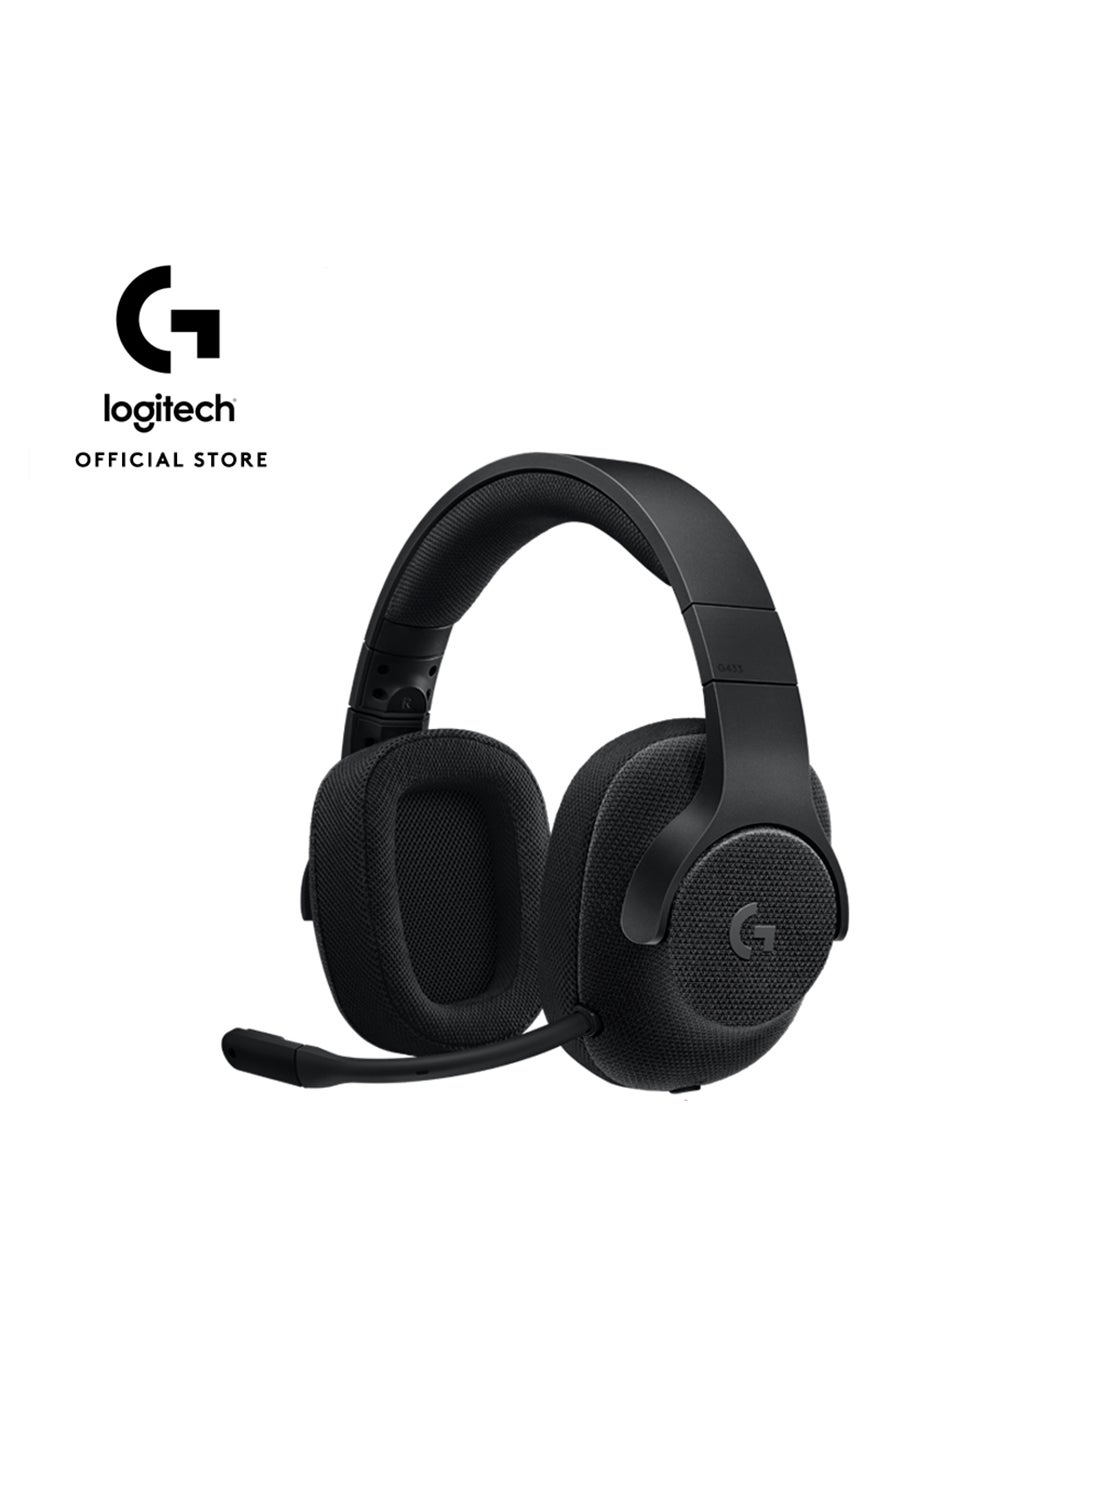 G433 Wired Gaming Headset, 7.1 Surround Sound, DTS Headphone:X, 40 mm Pro-G Audio Drivers, Lightweight, USB And 3.5 mm Jack,PC, Xbox One, Xbox Series X|S, PS5, PS4, Nintendo Switch 